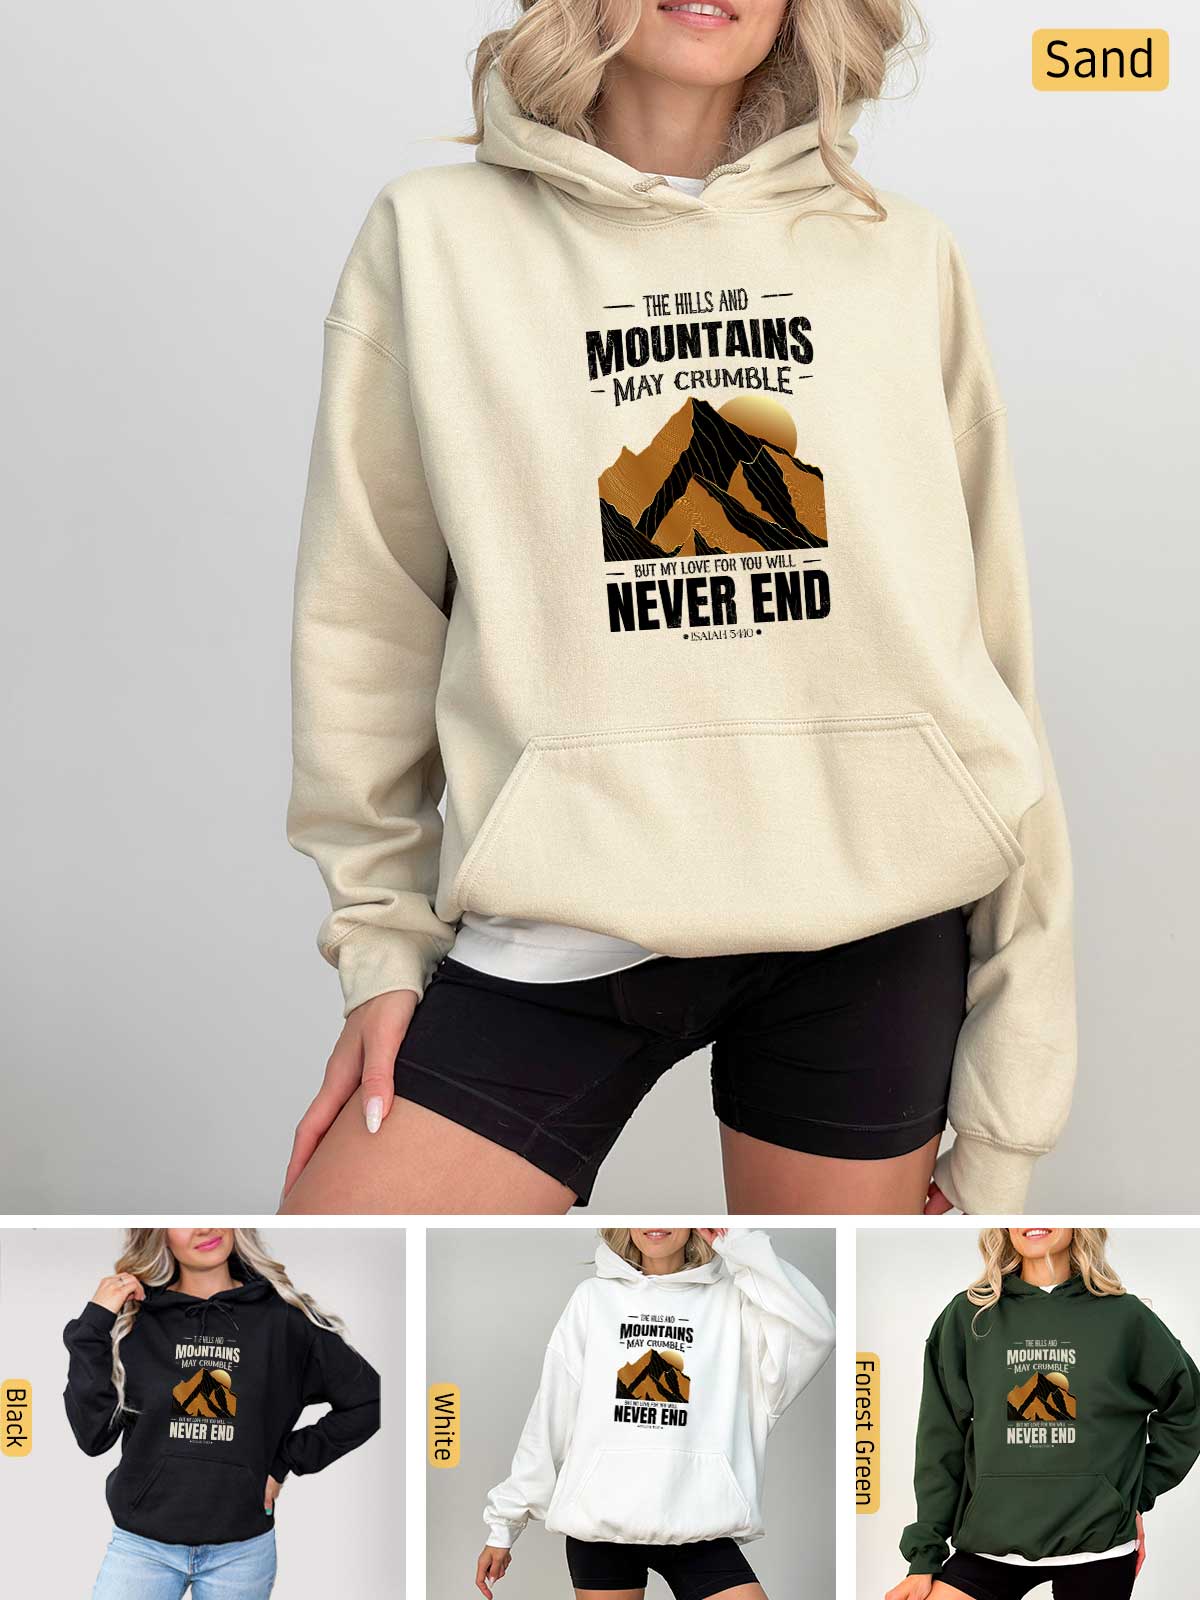 a woman wearing a hoodie that says mountains are never end